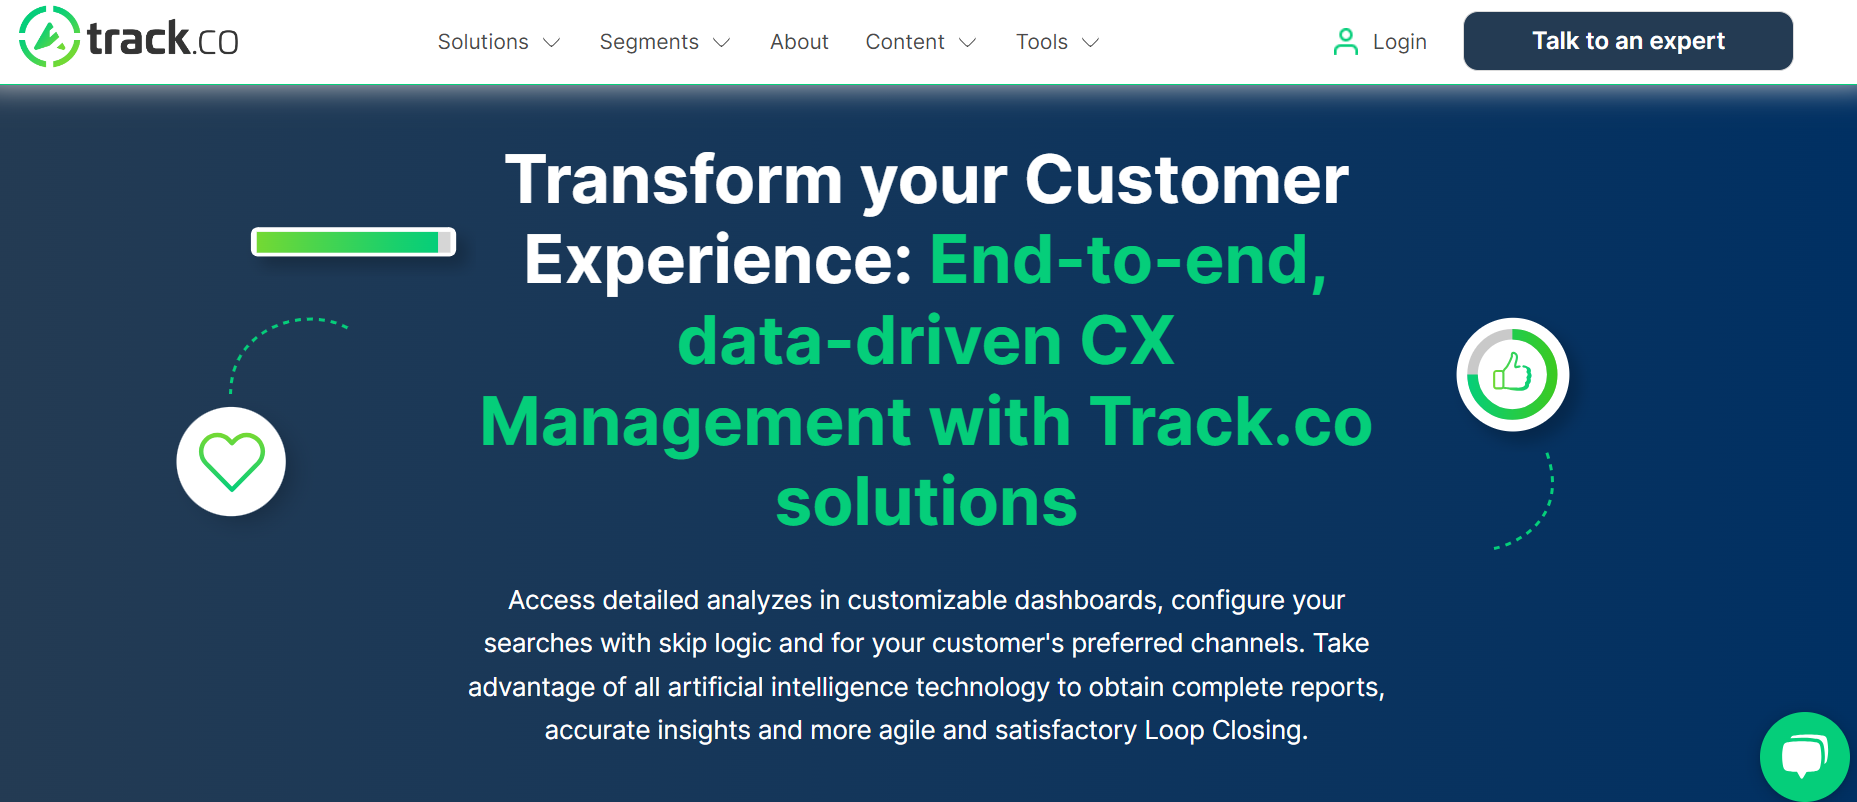 Voice of Customer Survey Tools Track.co